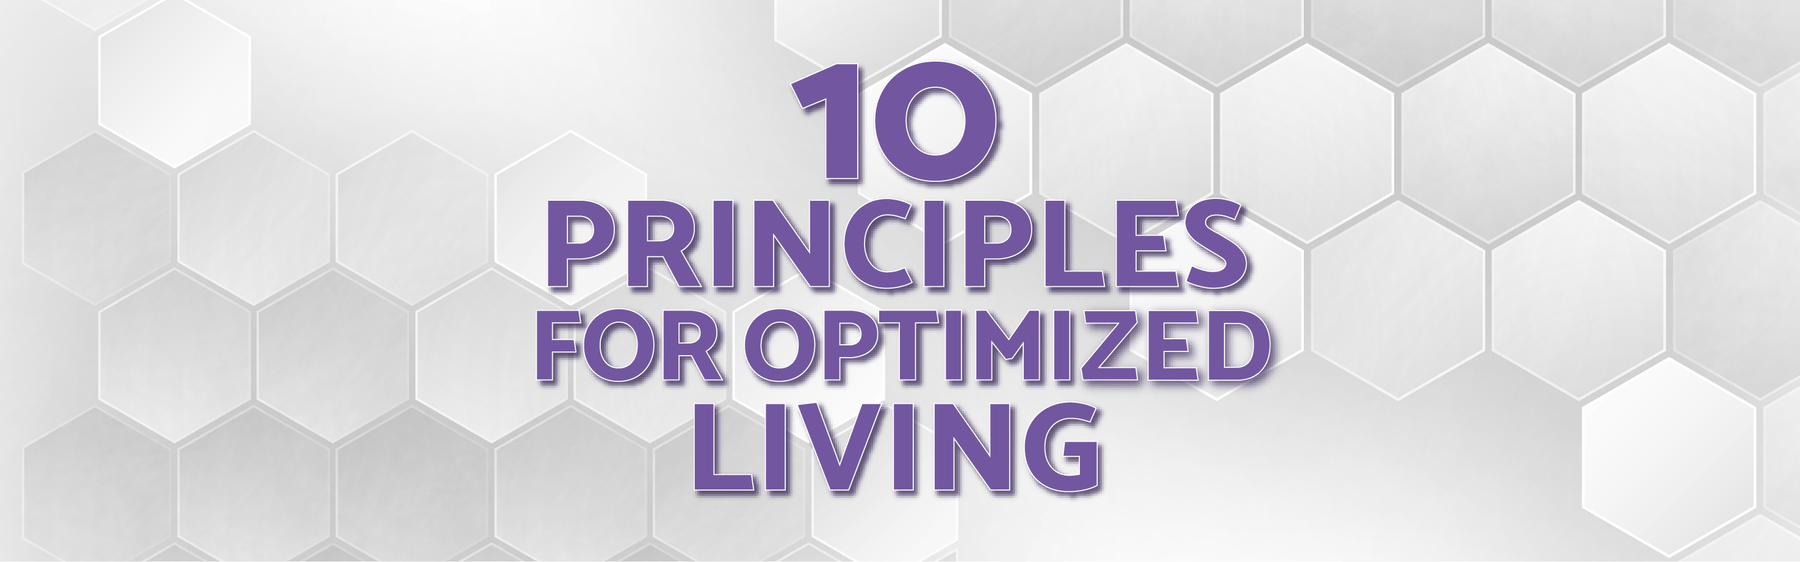 10 Principles for Optimized Living